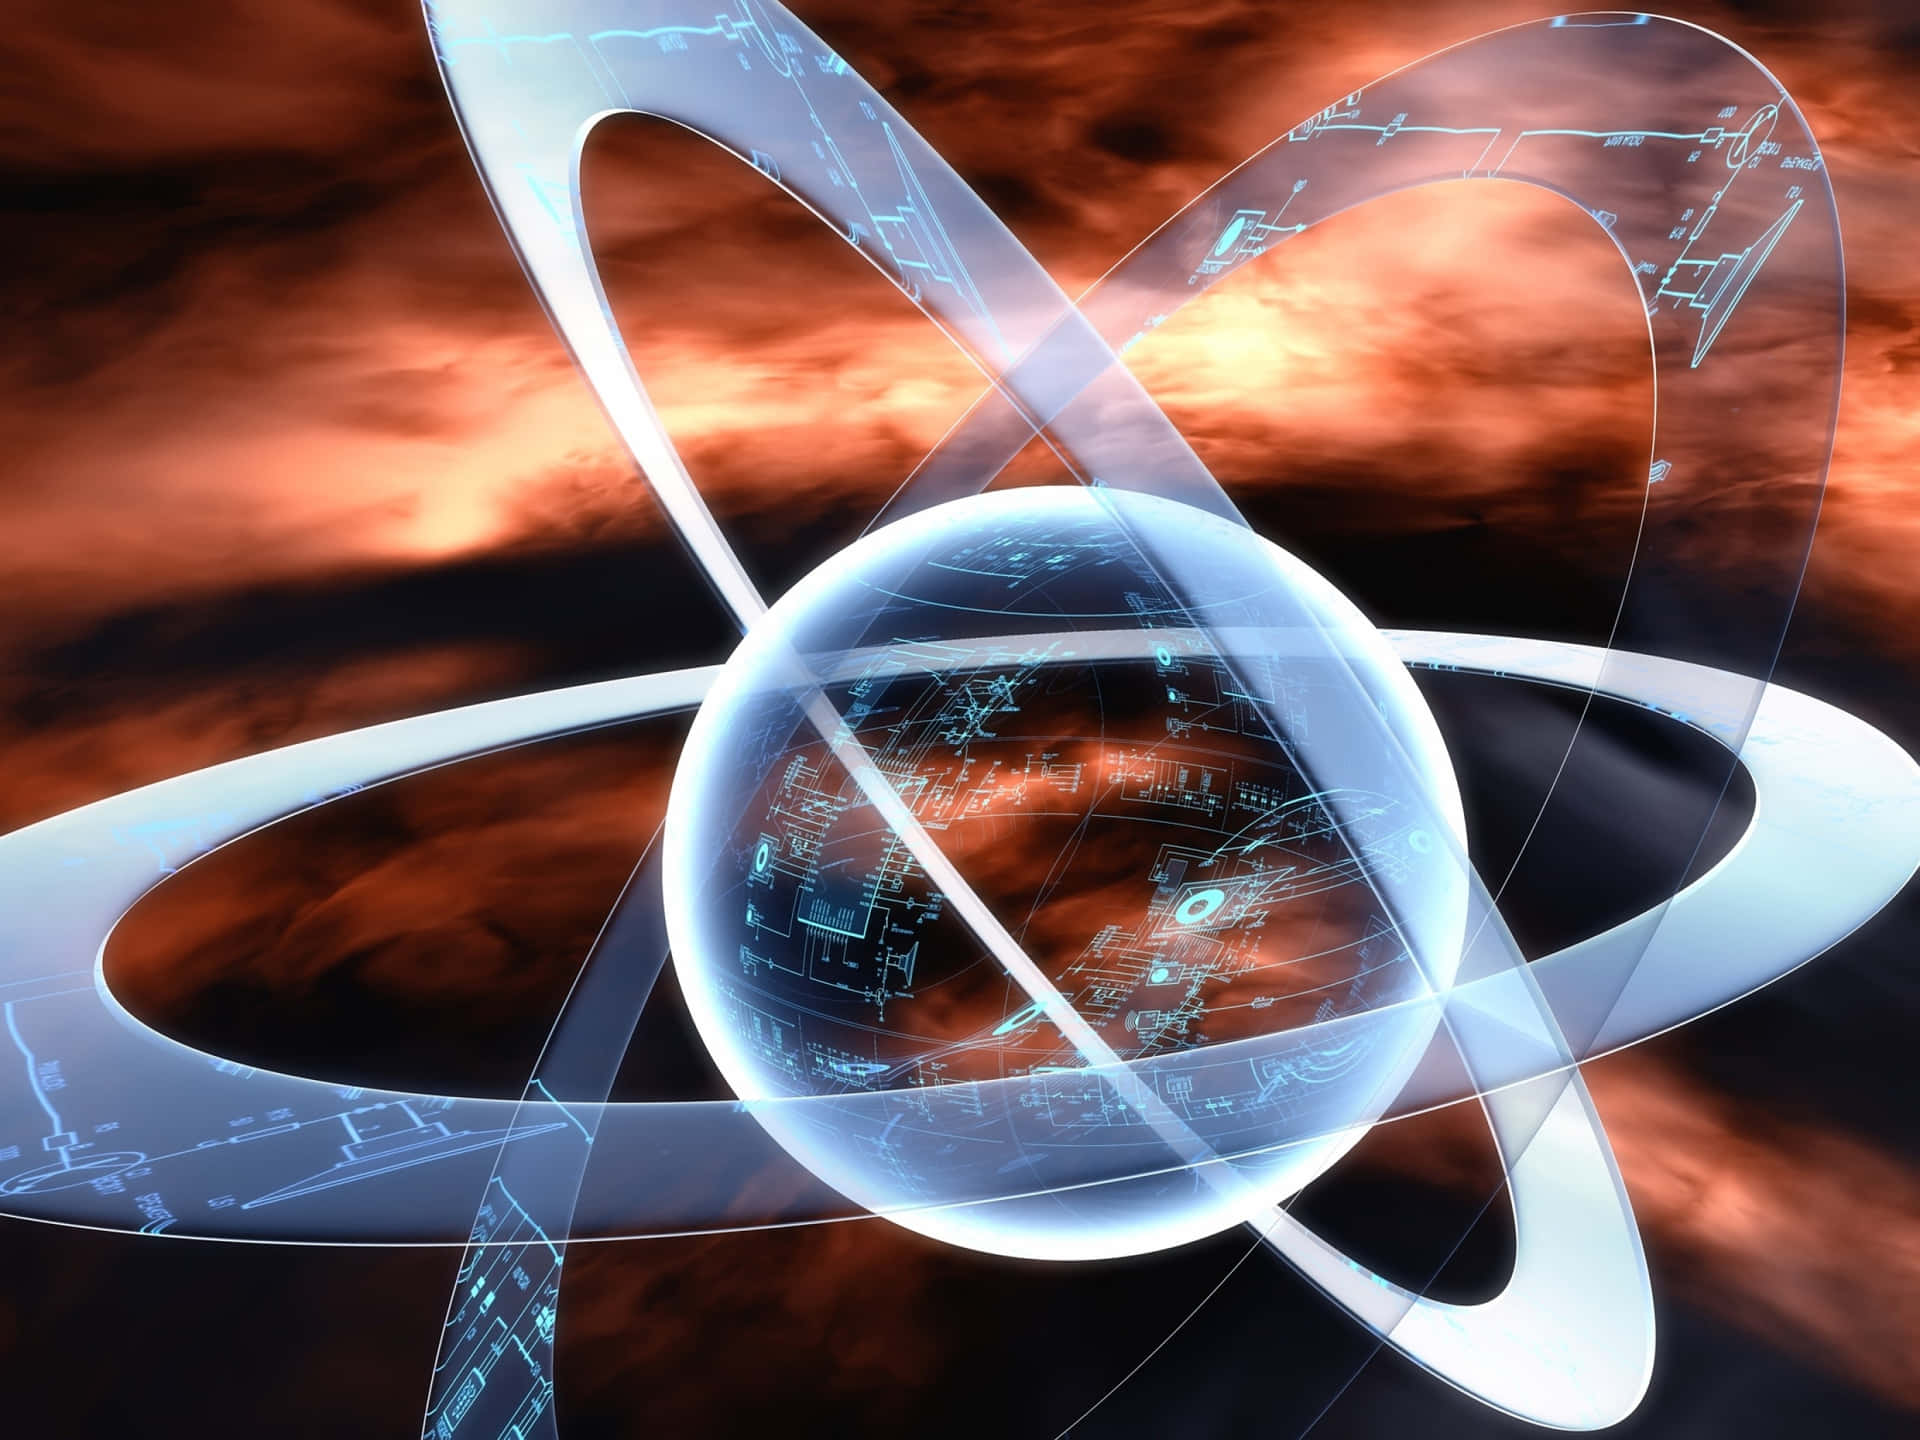 Free Physics Wallpaper Downloads, [200+] Physics Wallpapers for FREE |  